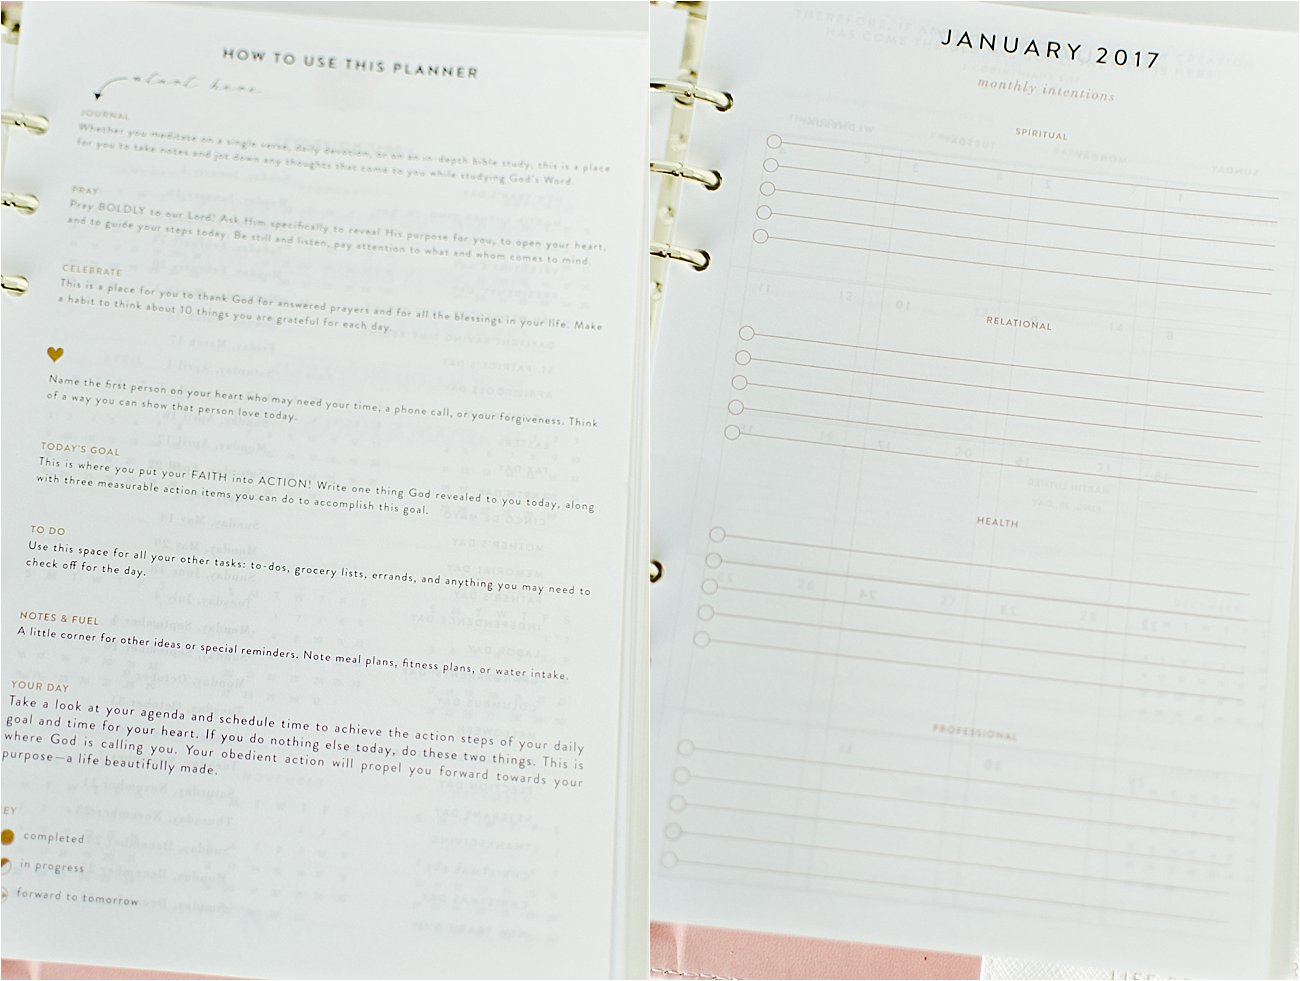 Taking on 2017 with The Intentional Planner | Intentional Planner Review - Christian Planner and Prayer Journal Review (8)